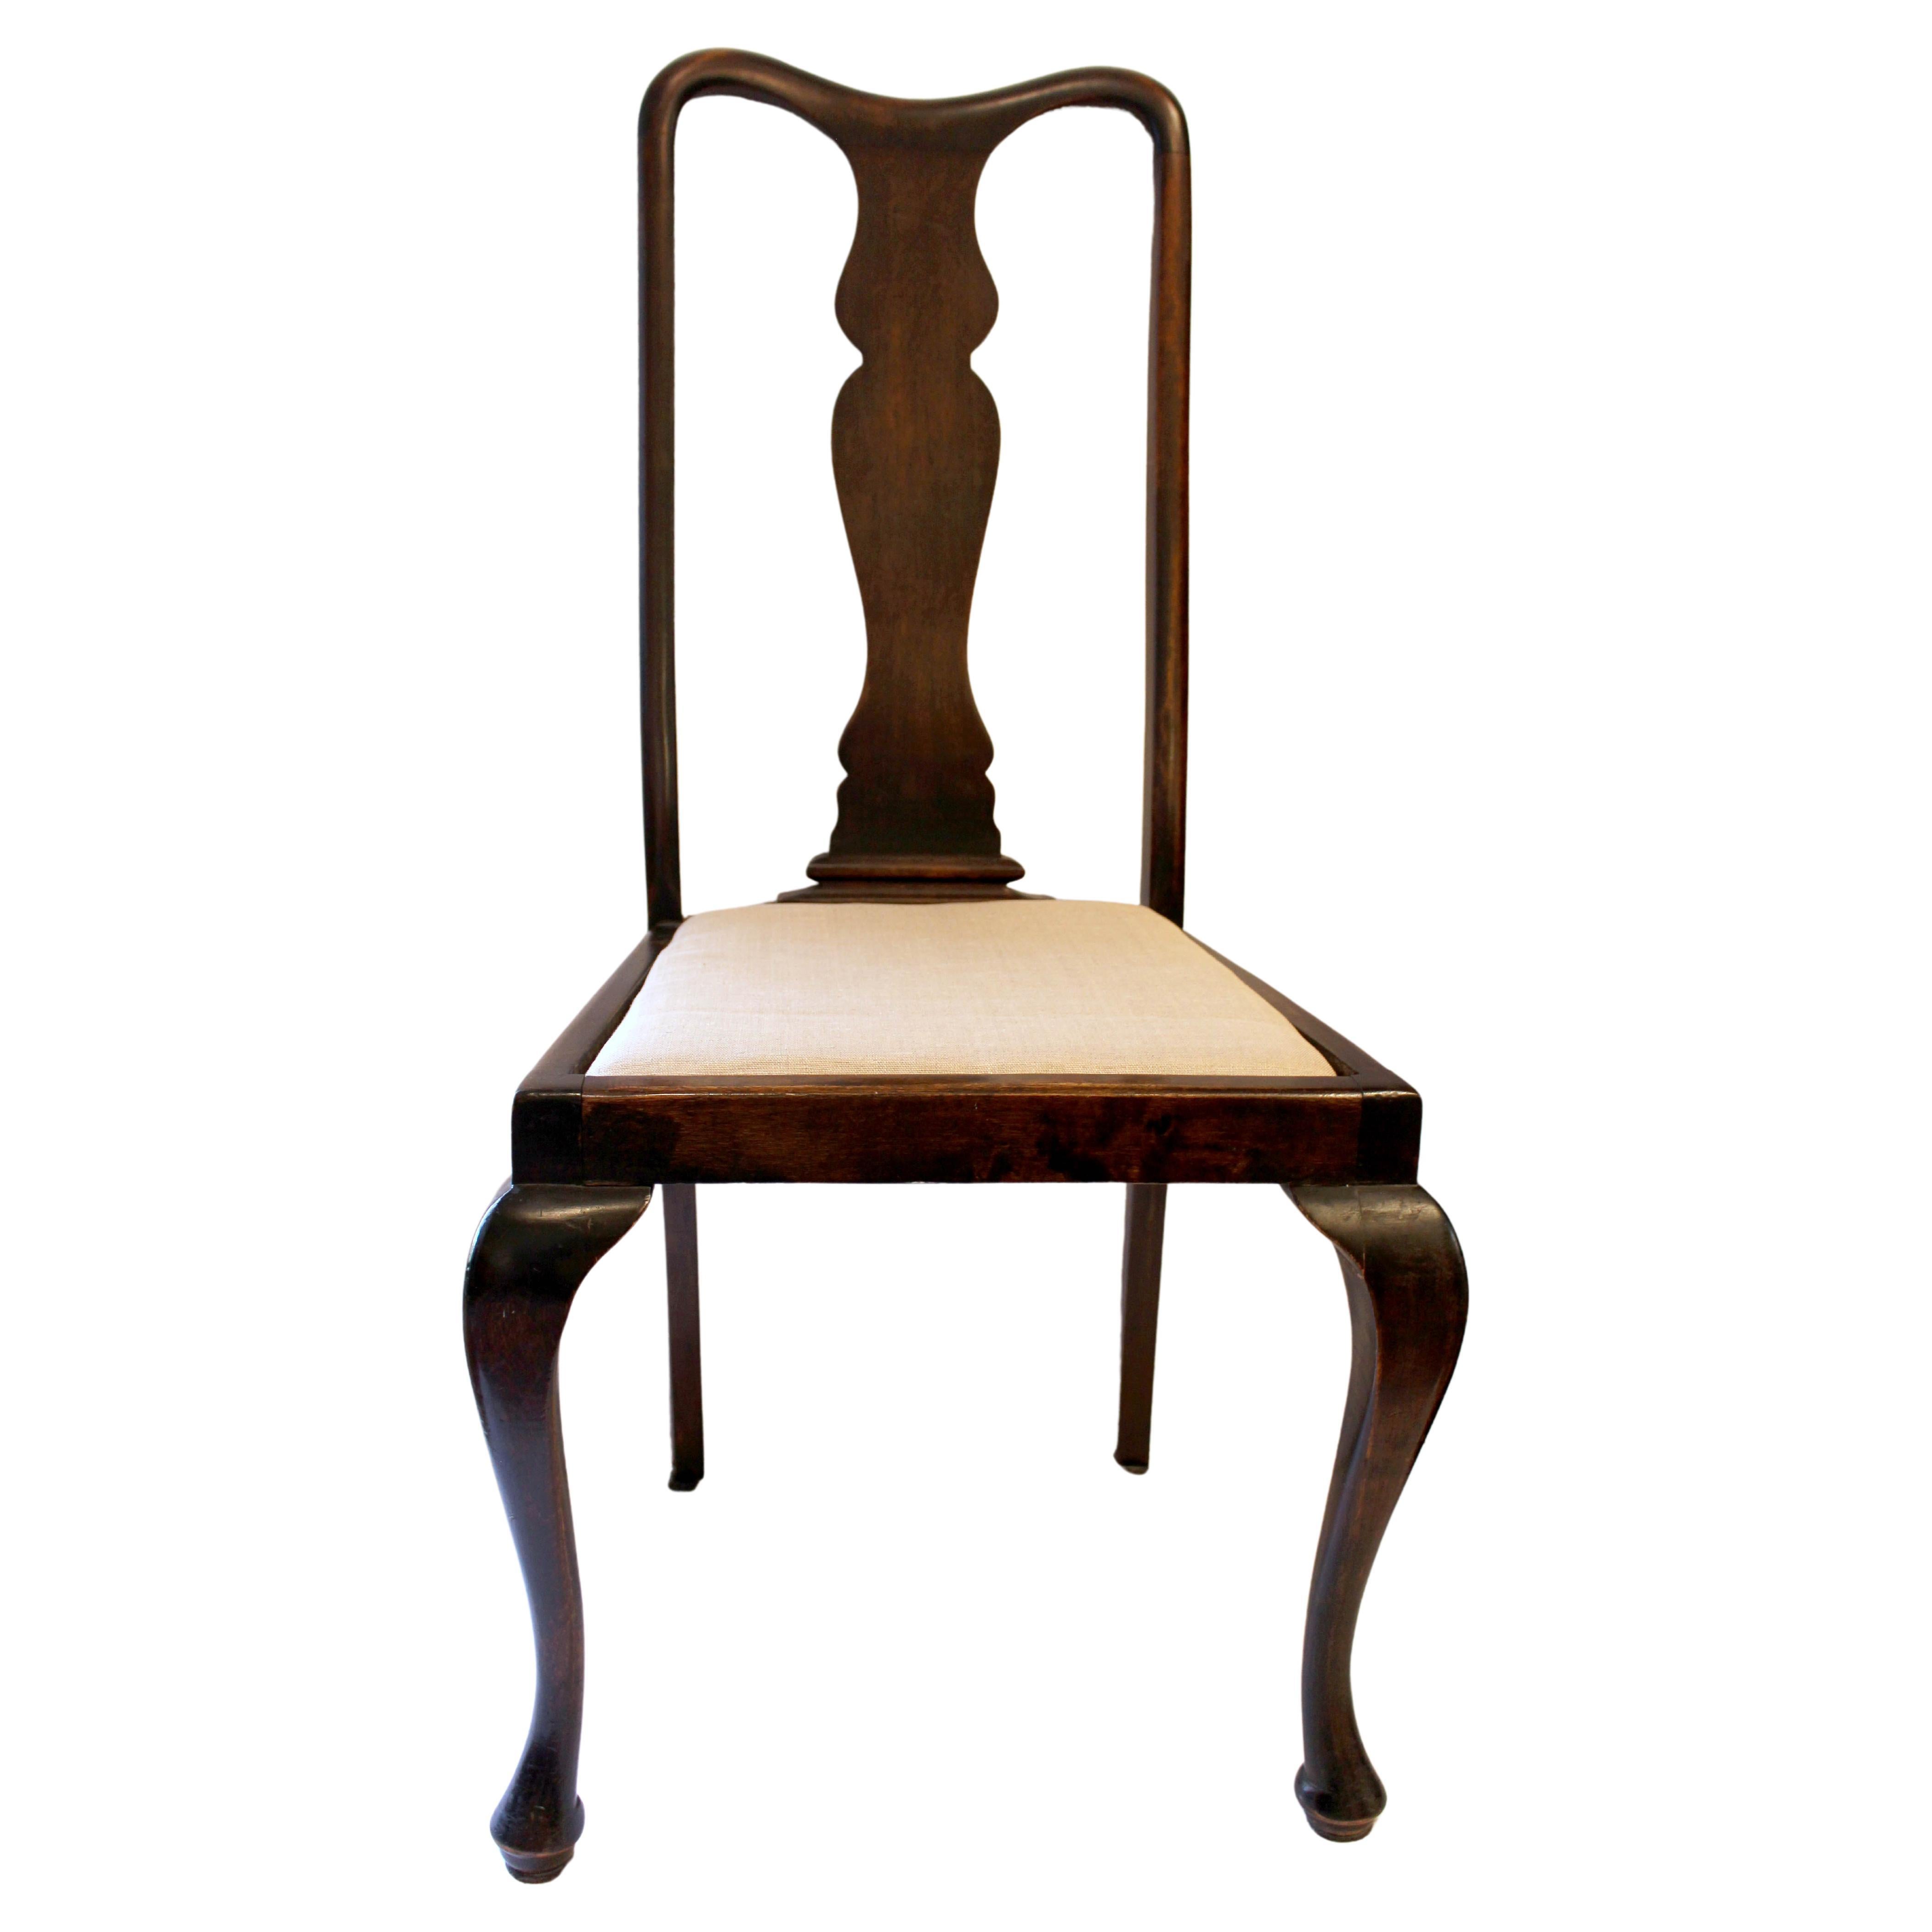 Late 19th century Queen Anne style Side Chair, English